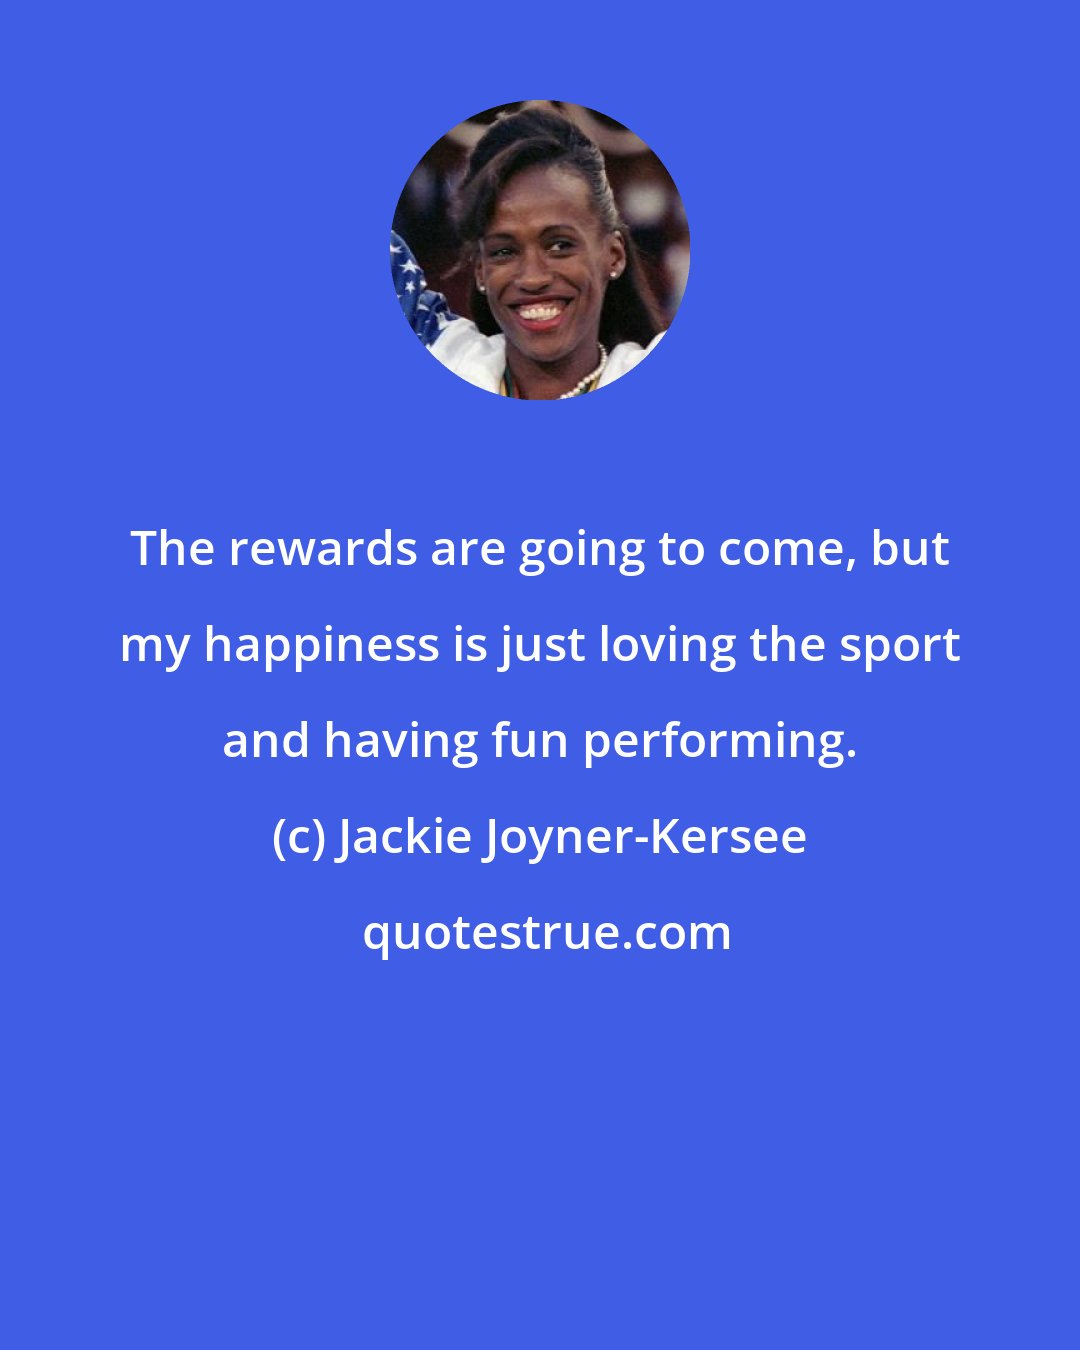 Jackie Joyner-Kersee: The rewards are going to come, but my happiness is just loving the sport and having fun performing.